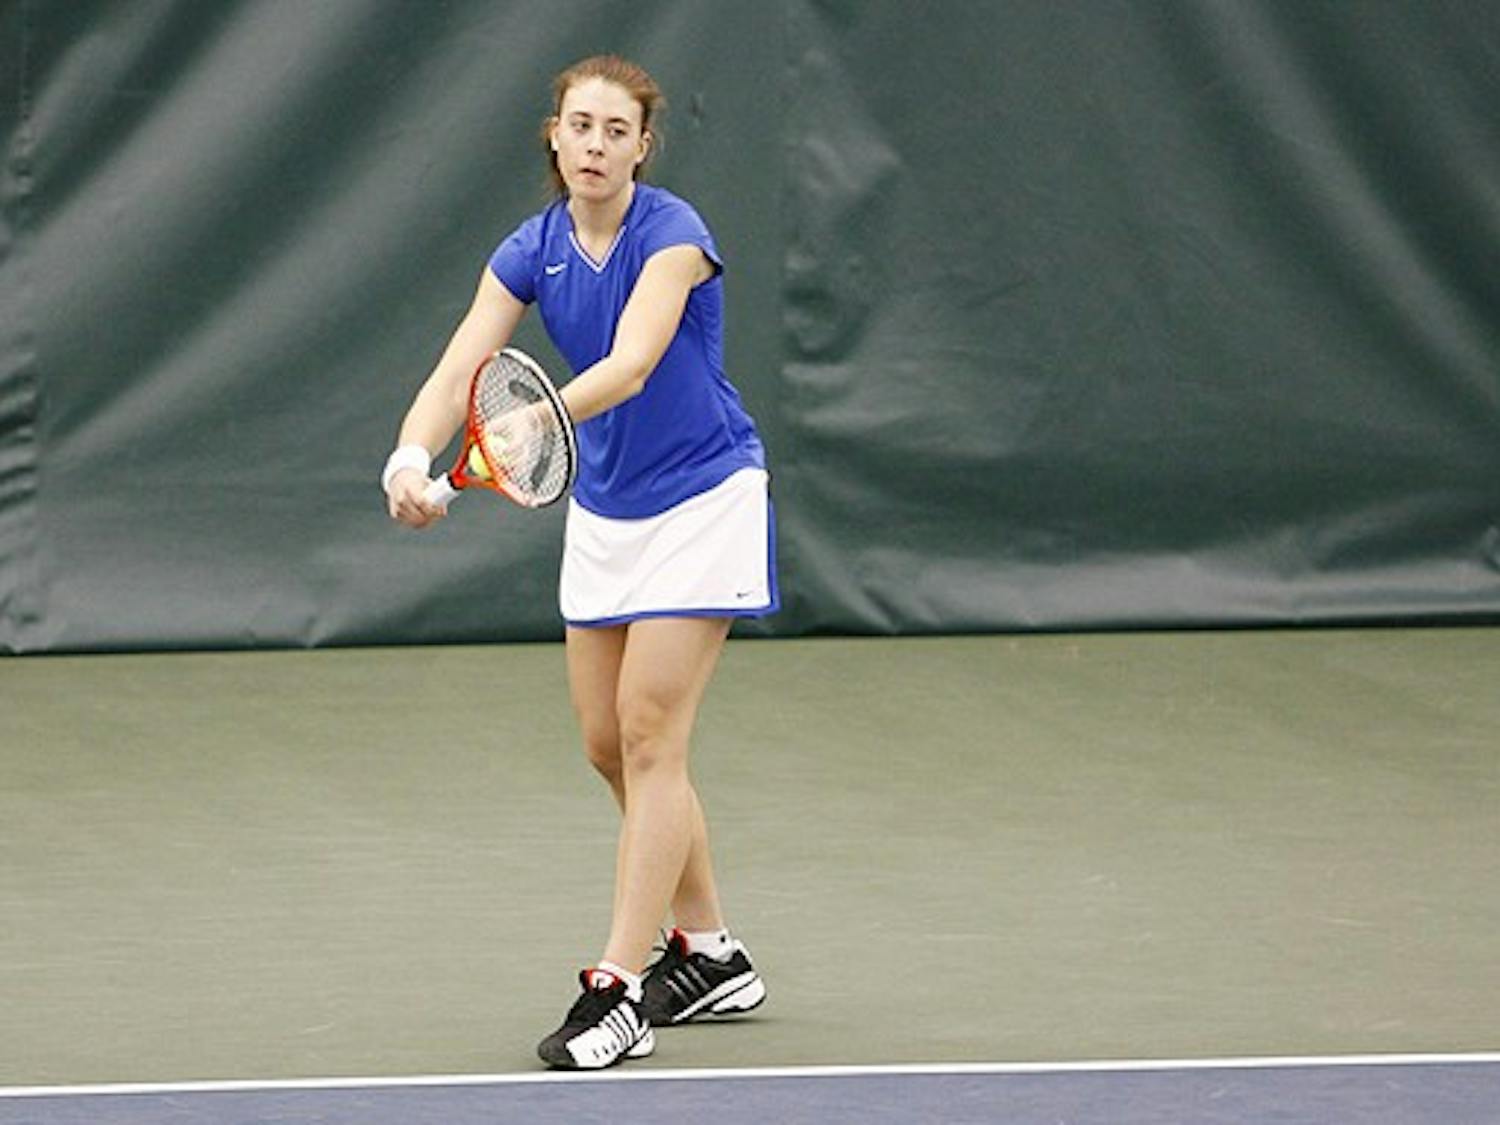 The Blue Devils beat Old Dominion 6-1 on Friday night.